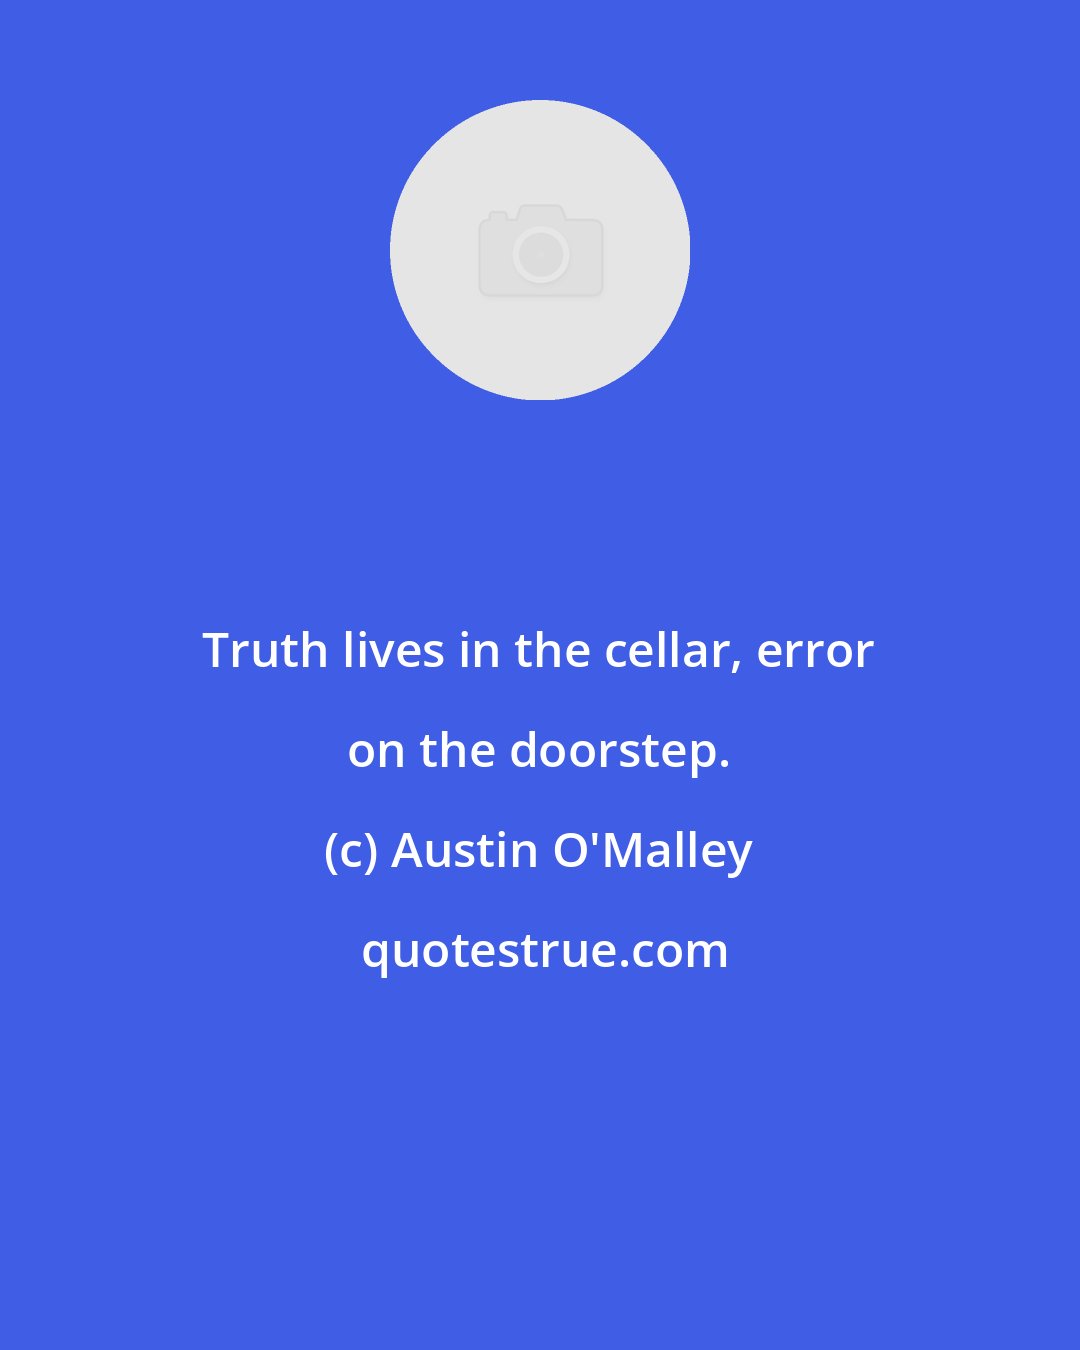 Austin O'Malley: Truth lives in the cellar, error on the doorstep.